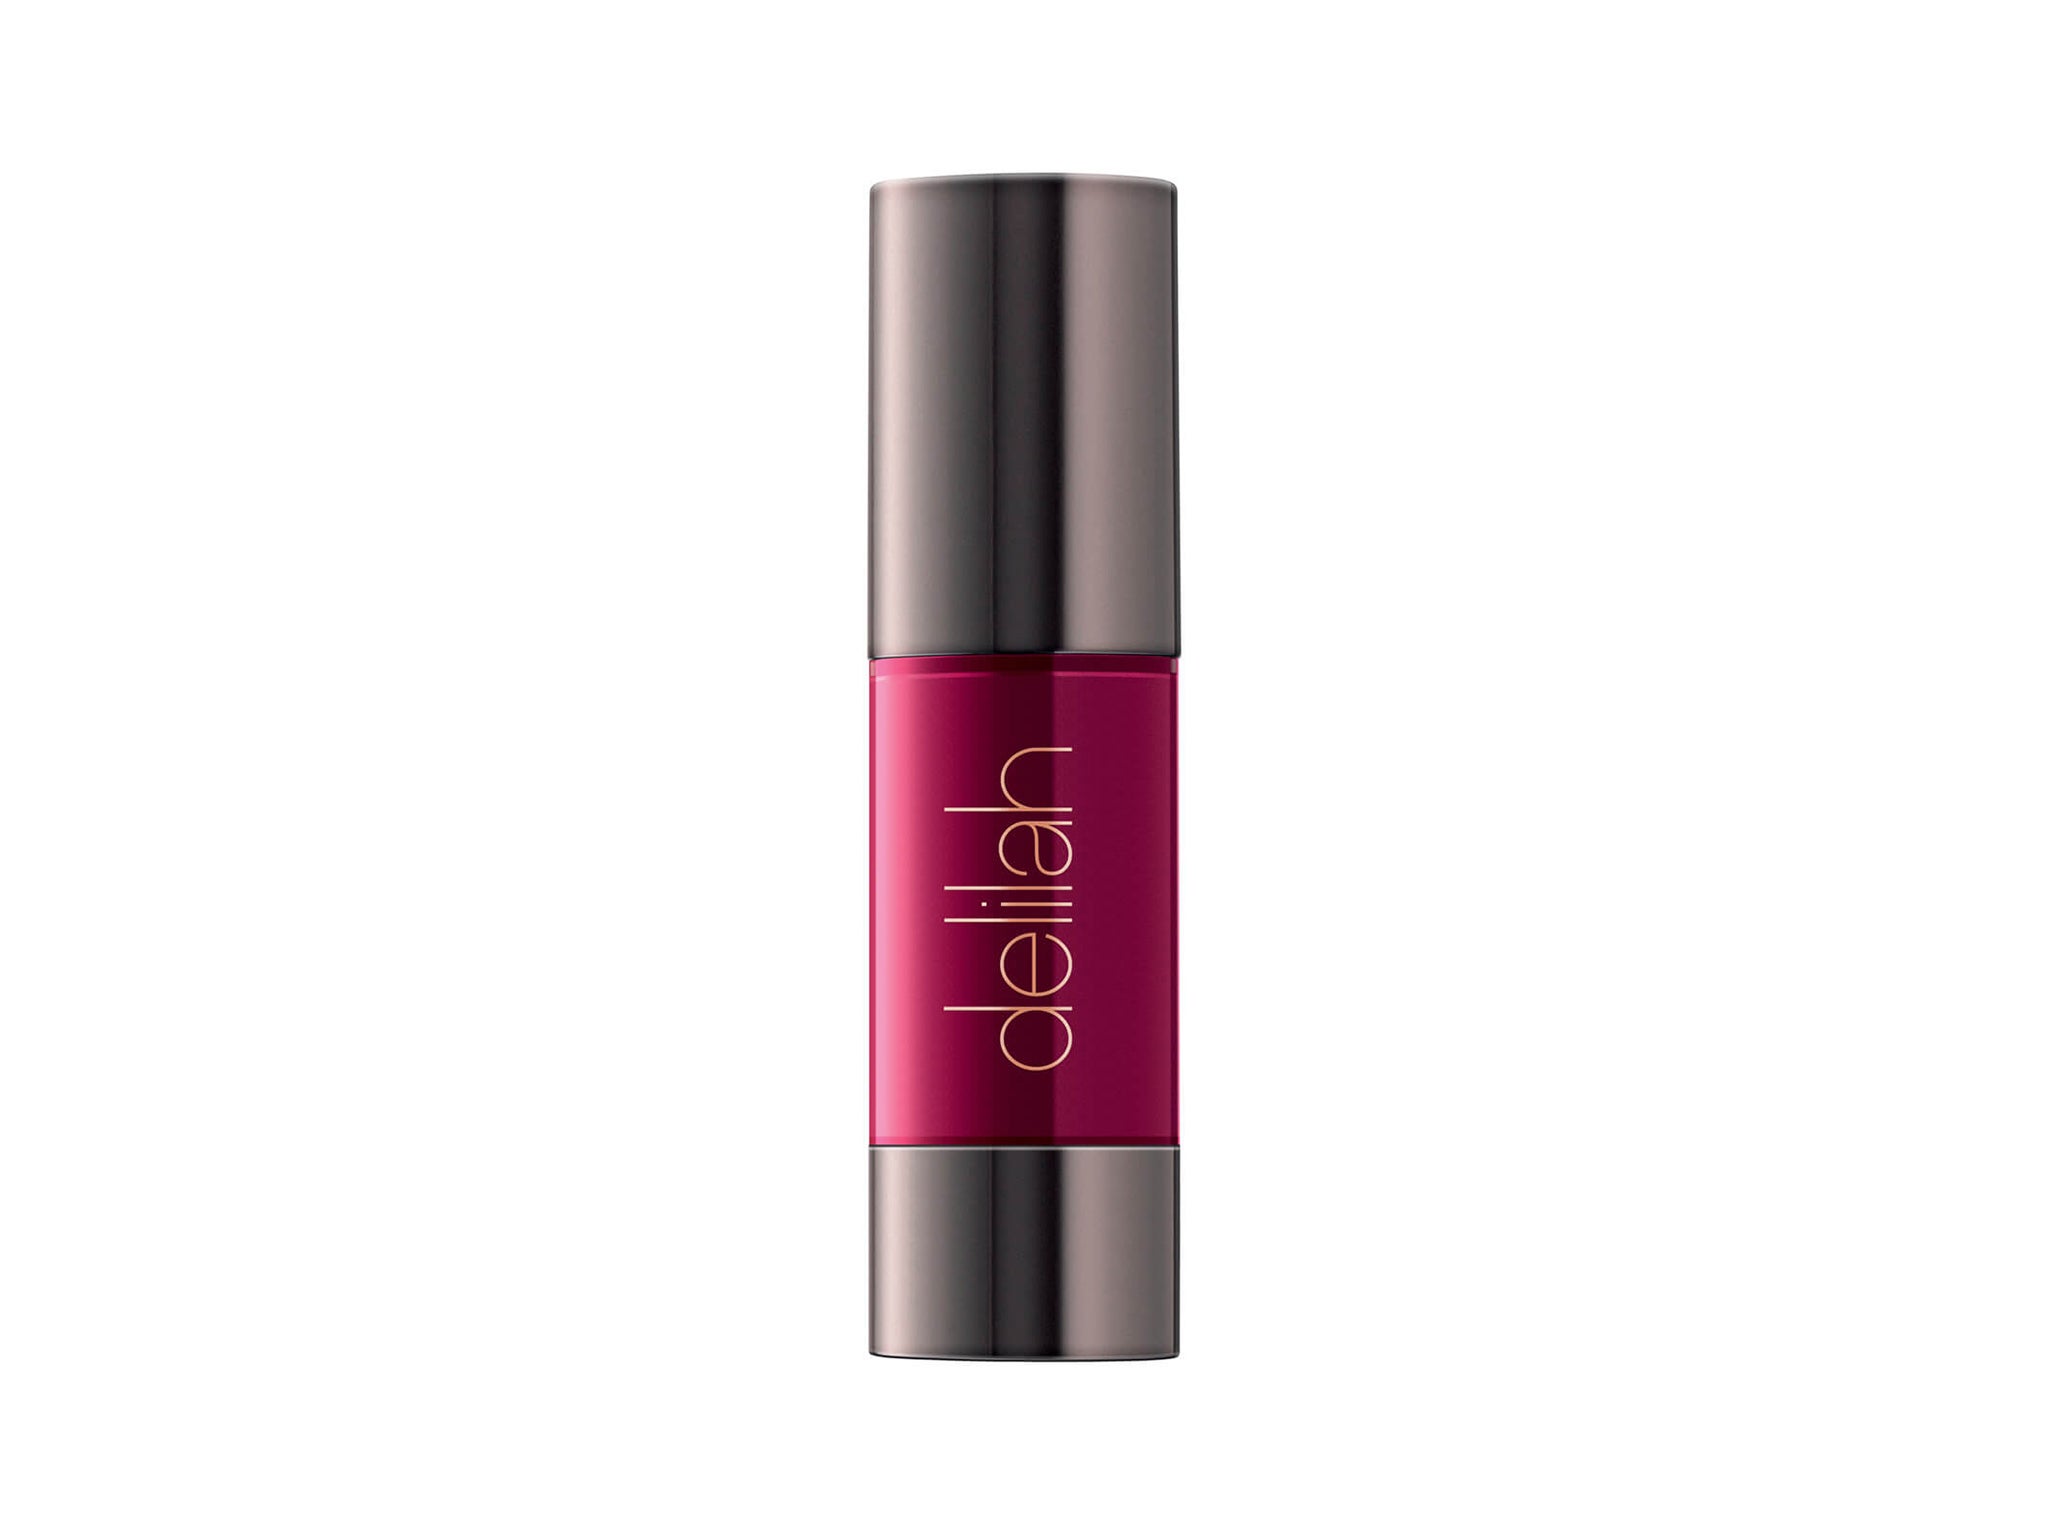 This wine-coloured liquid lipstick is a bold shade that will last all-day